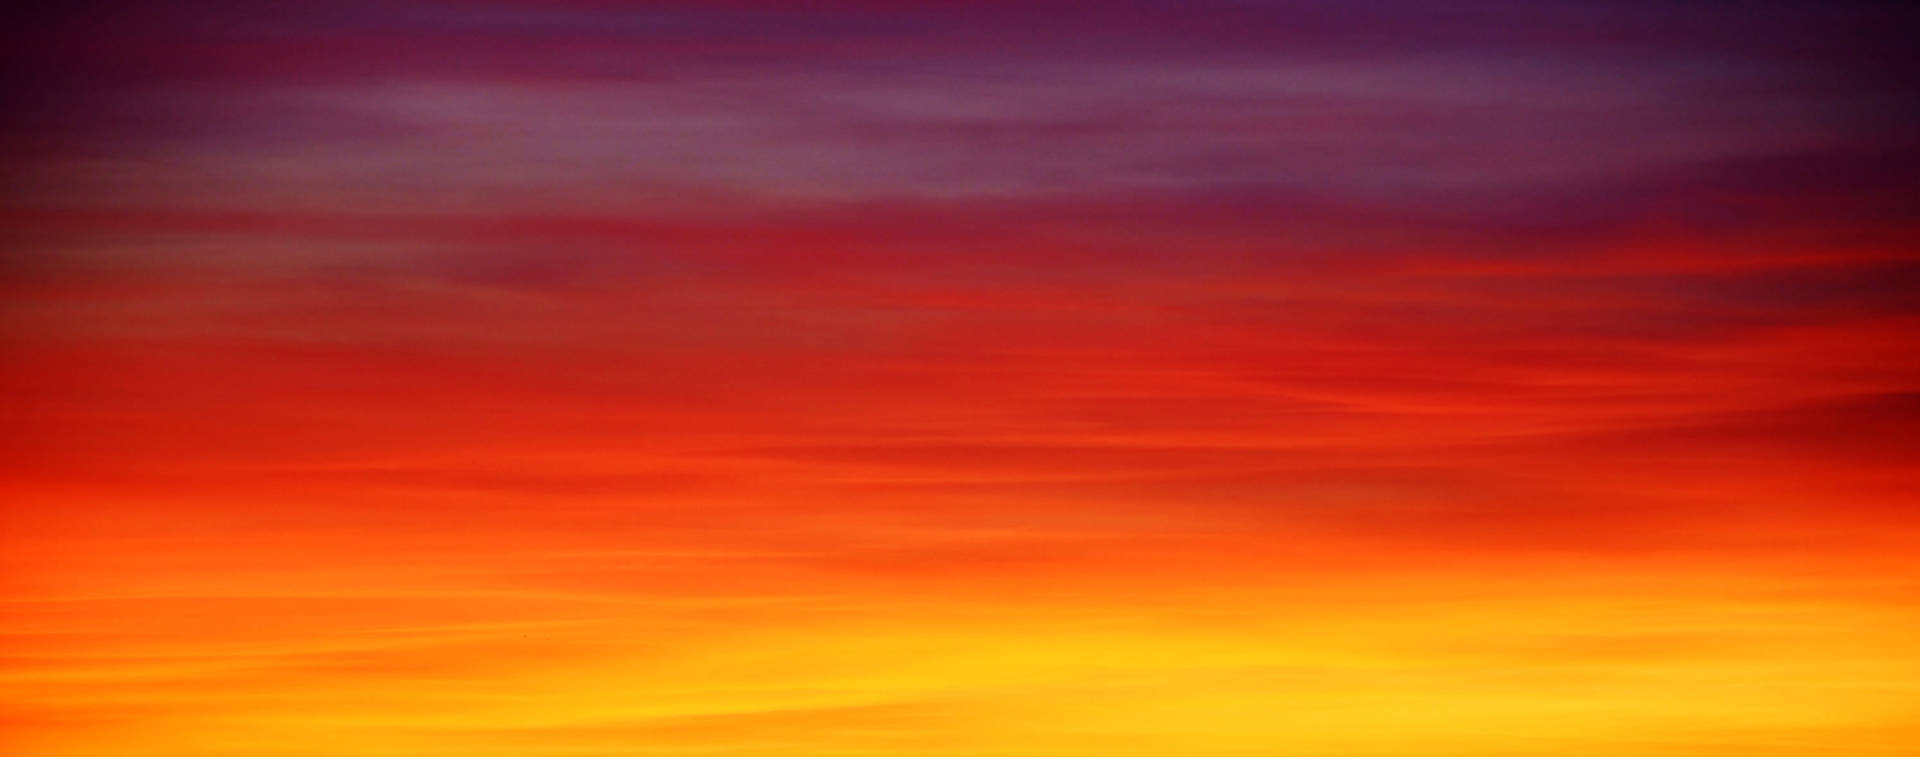 Sky 5993X2362 Wallpaper and Background Image